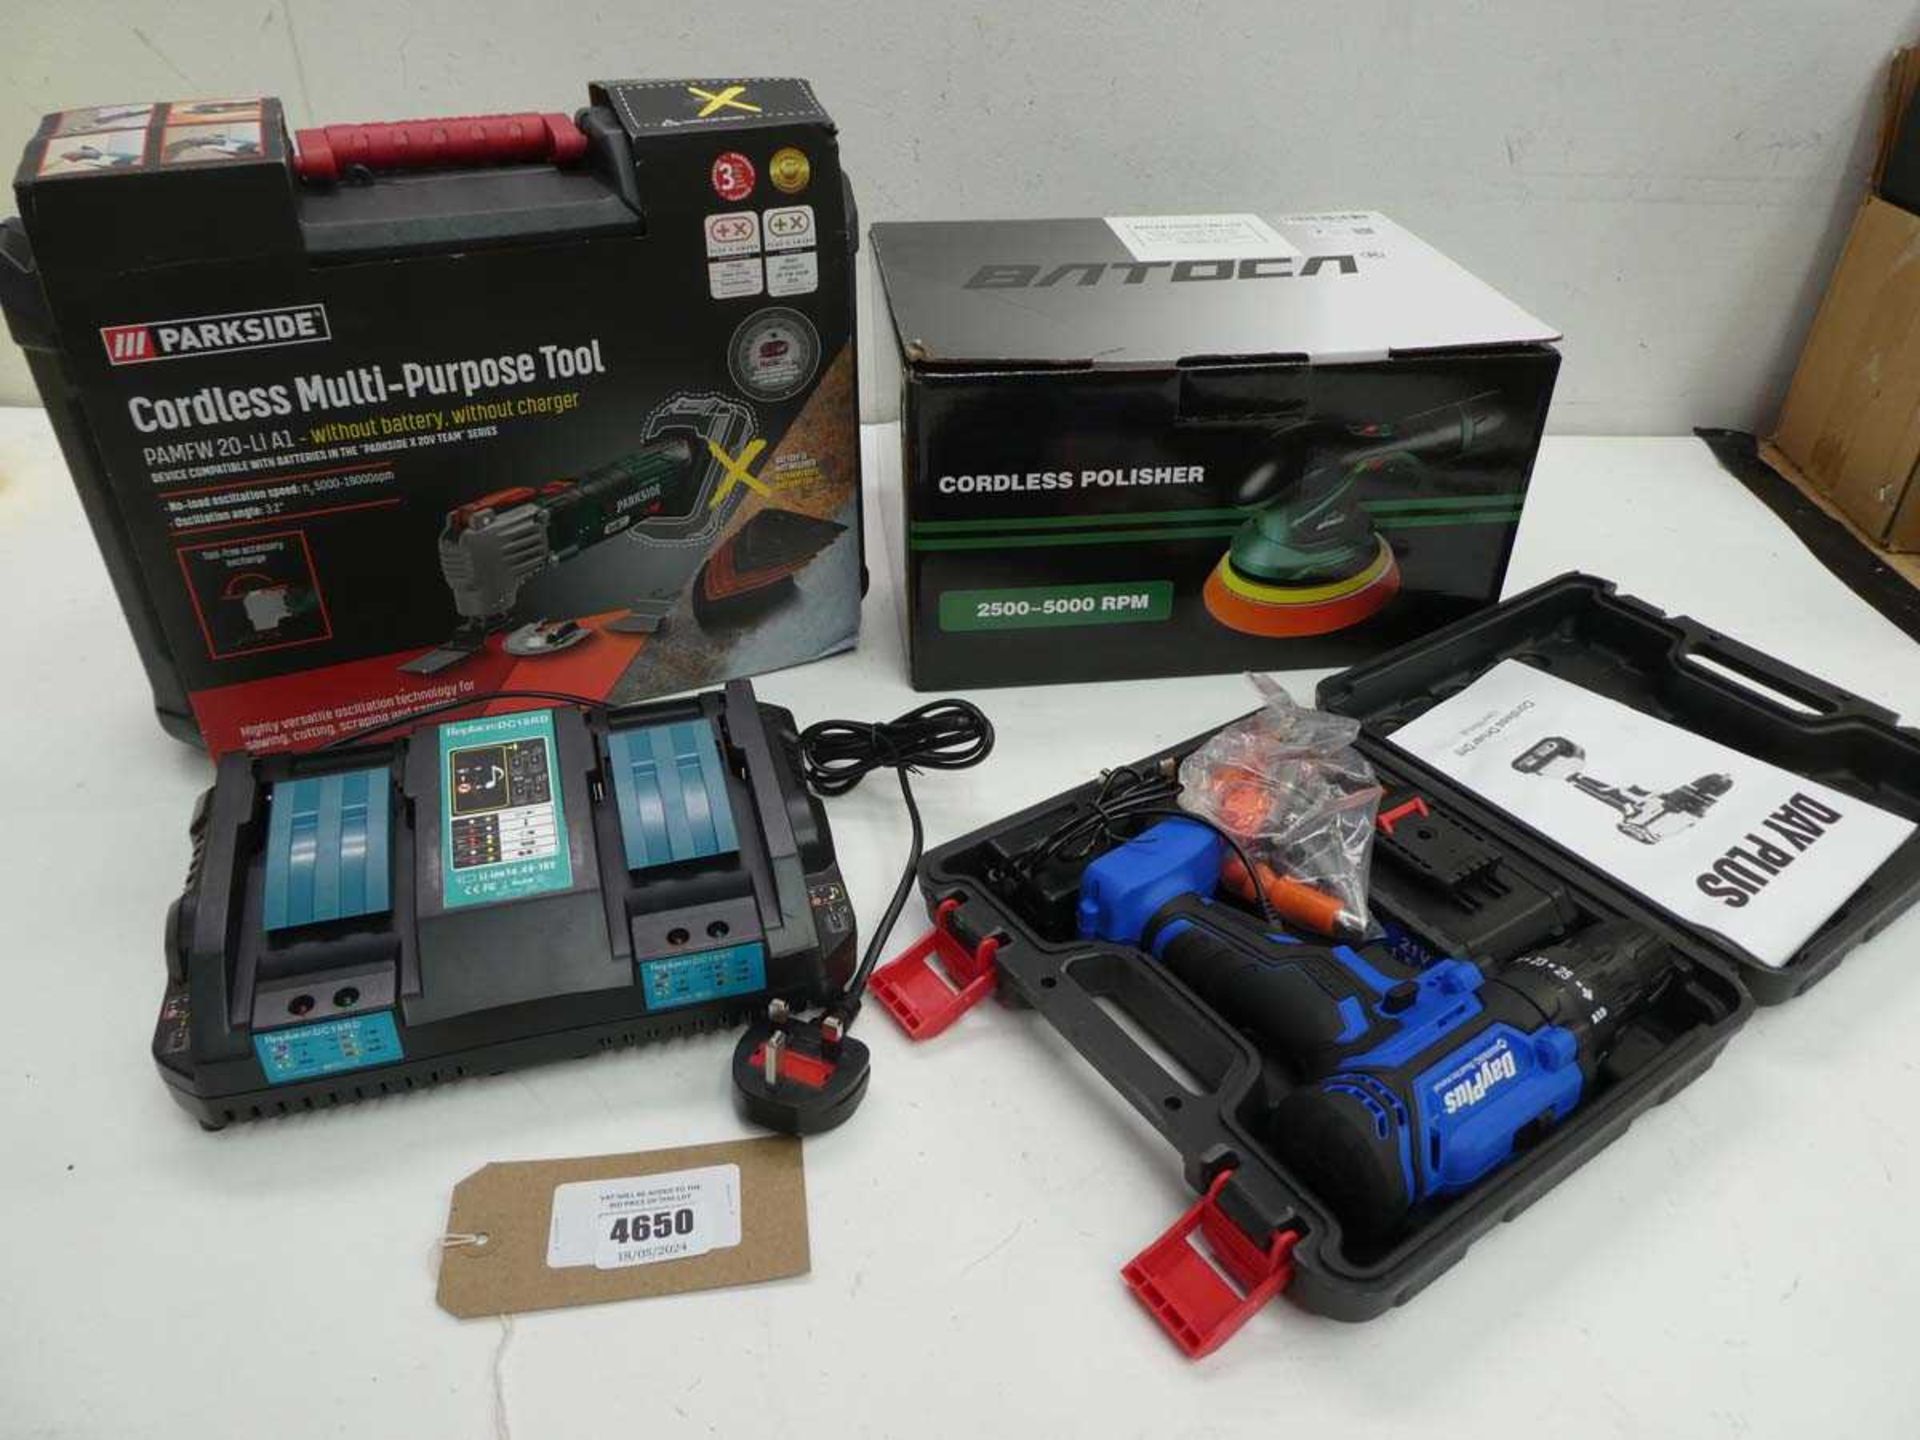 +VAT Cordless multi purpose tool, cordless drill, cordless polisher and battery charger